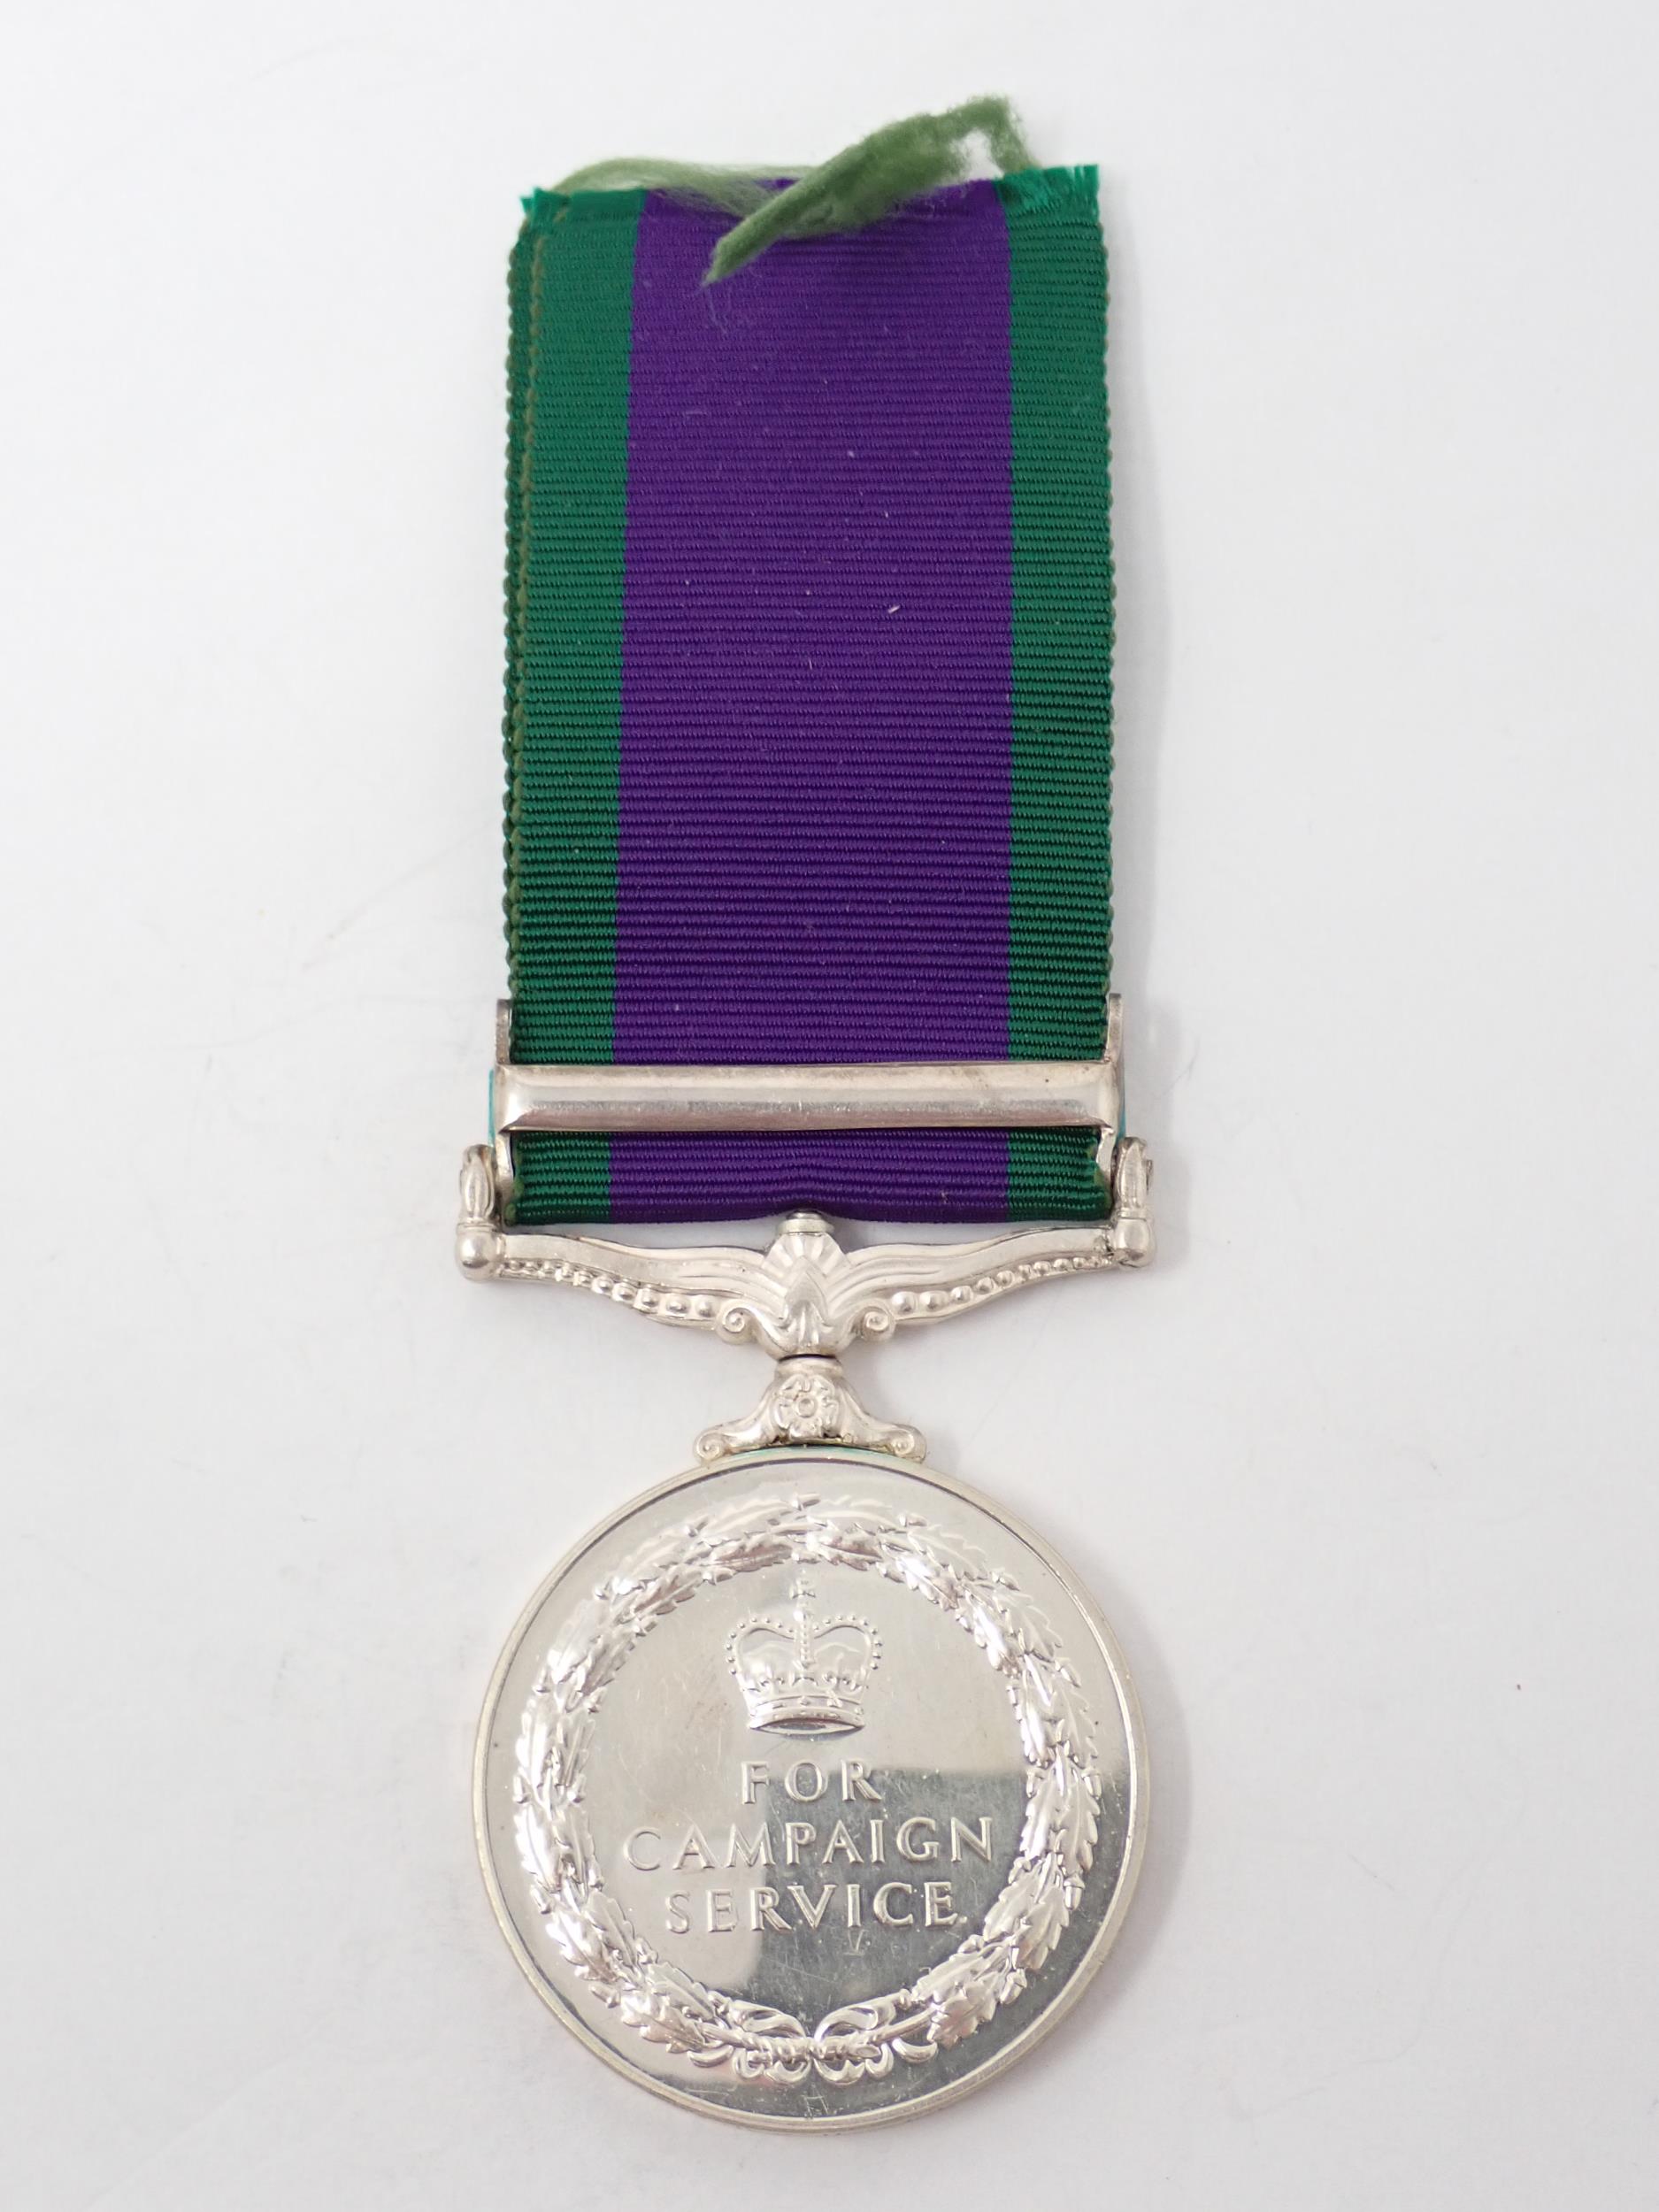 Campaign Service Medal with South Arabia Bar to 4273563 LAC H. Ronald, Royal Air Force - Image 2 of 4